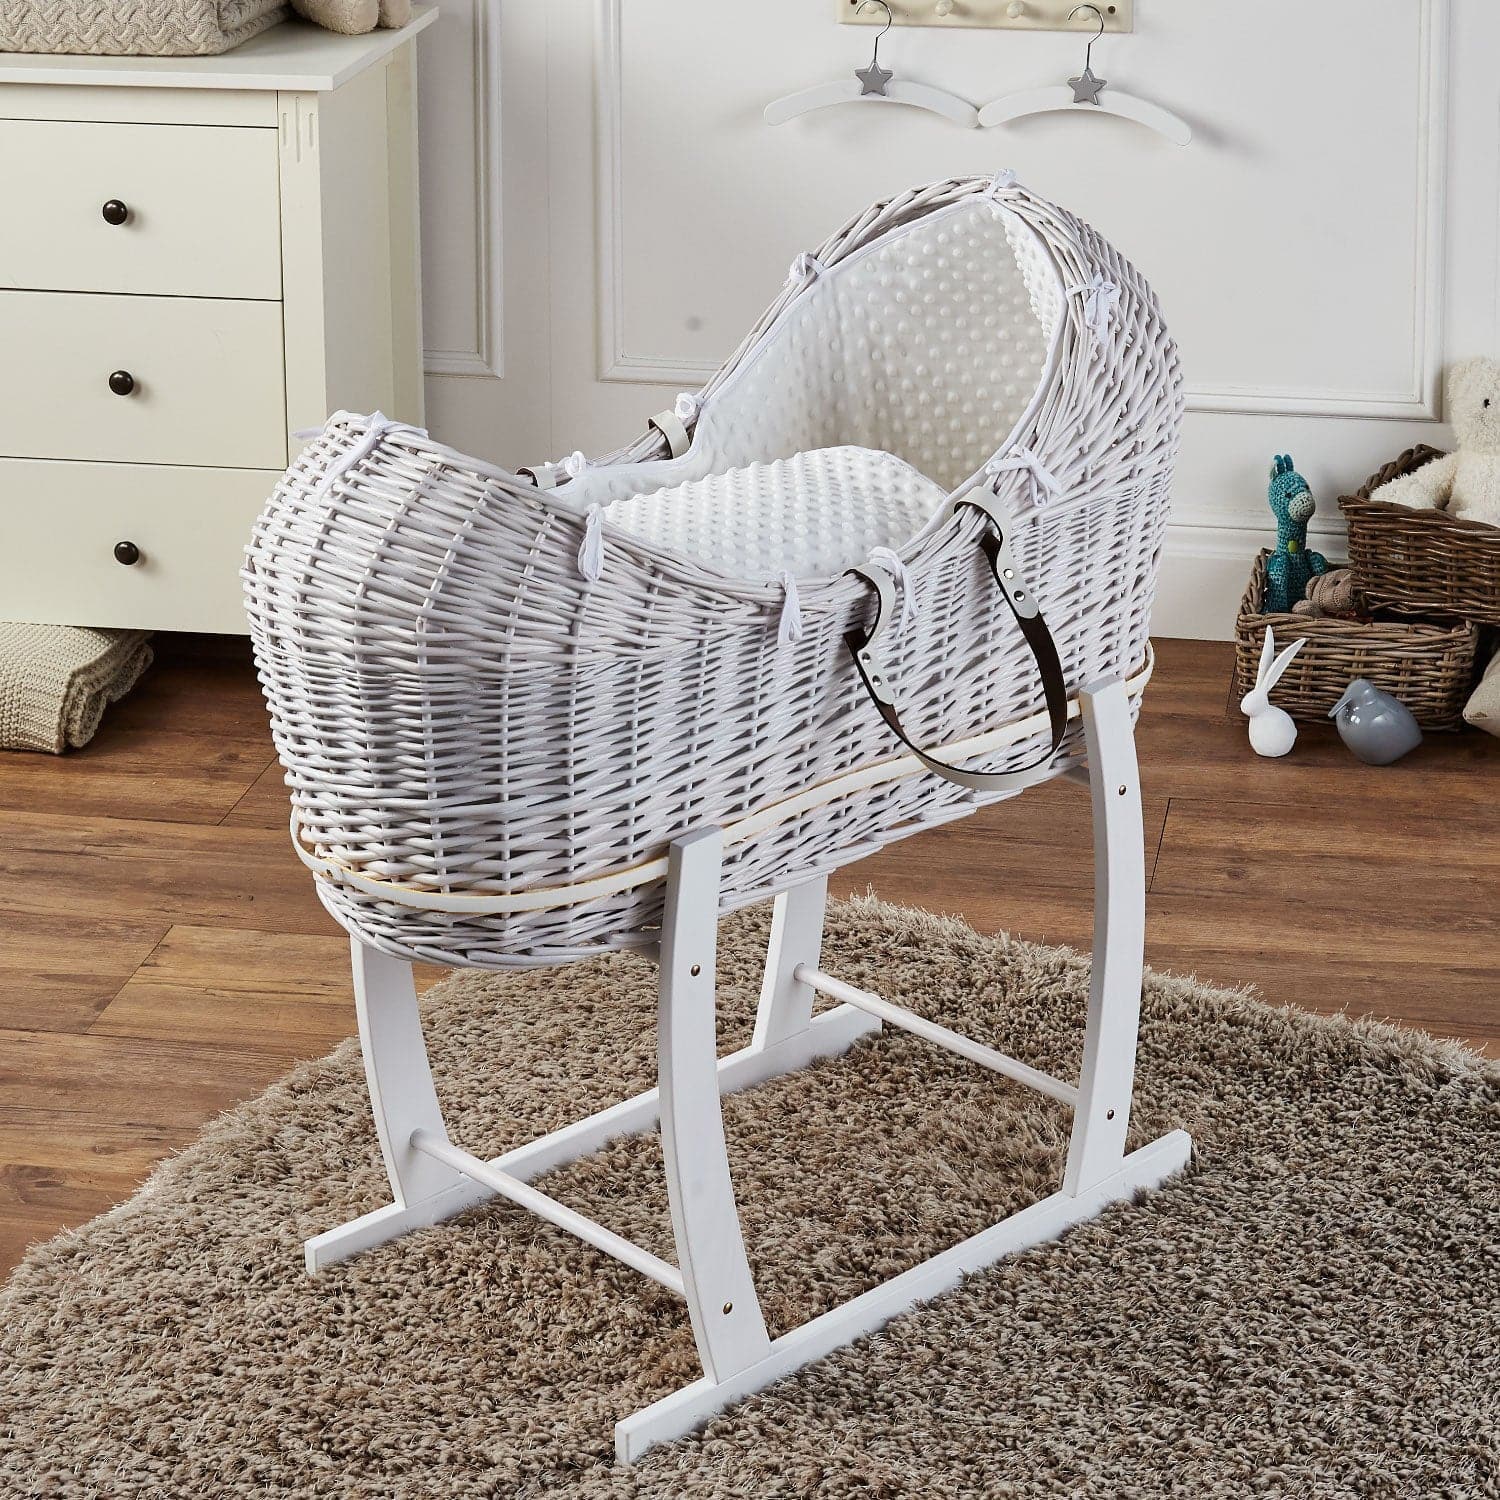 Wicker Deluxe Pod Baby Moses Basket With Stand - White / Dimple / White | For Your Little One